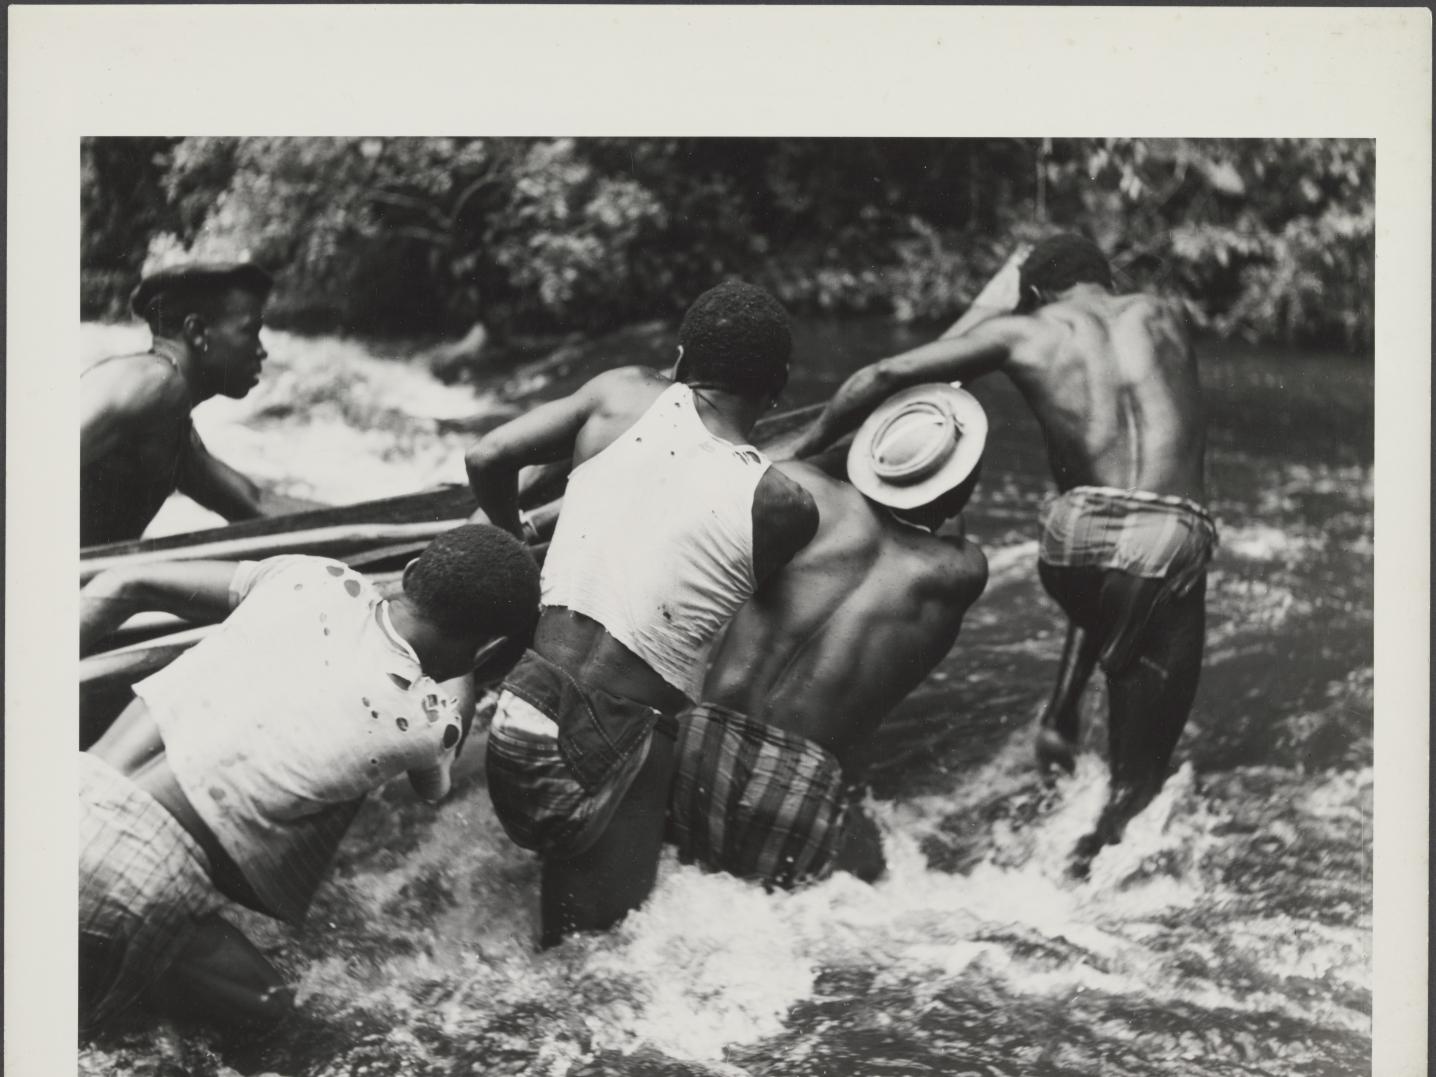 A group of surinamese Maroon men pulling a boat acroos a wild river